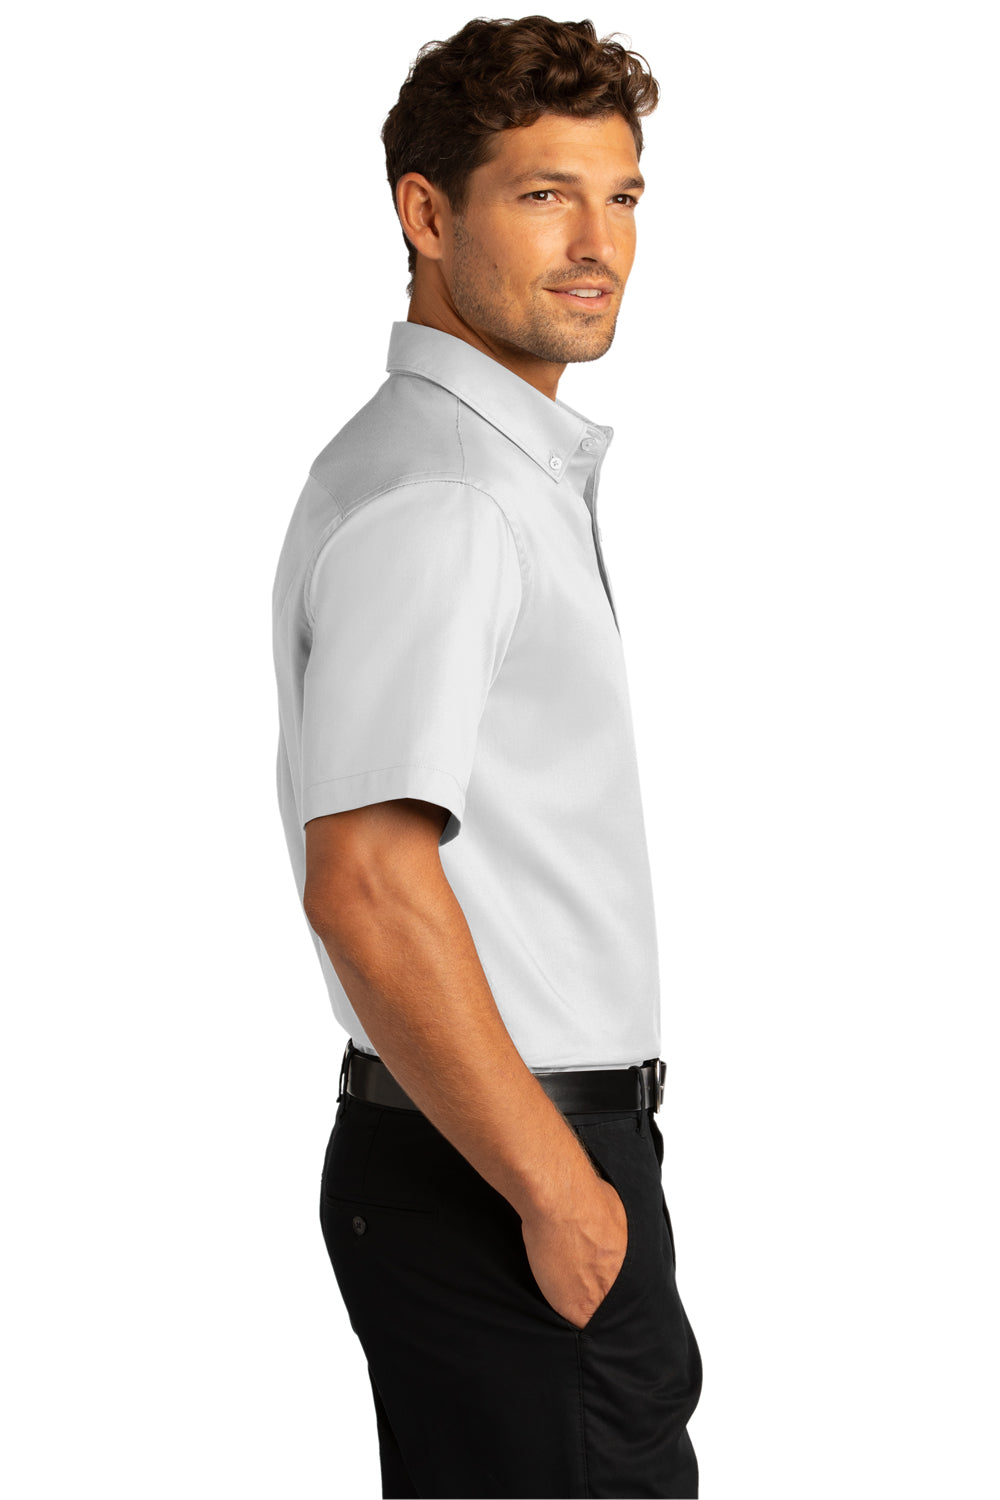 Port Authority Mens SuperPro React Short Sleeve Button Down Shirt w/ Pocket White Side